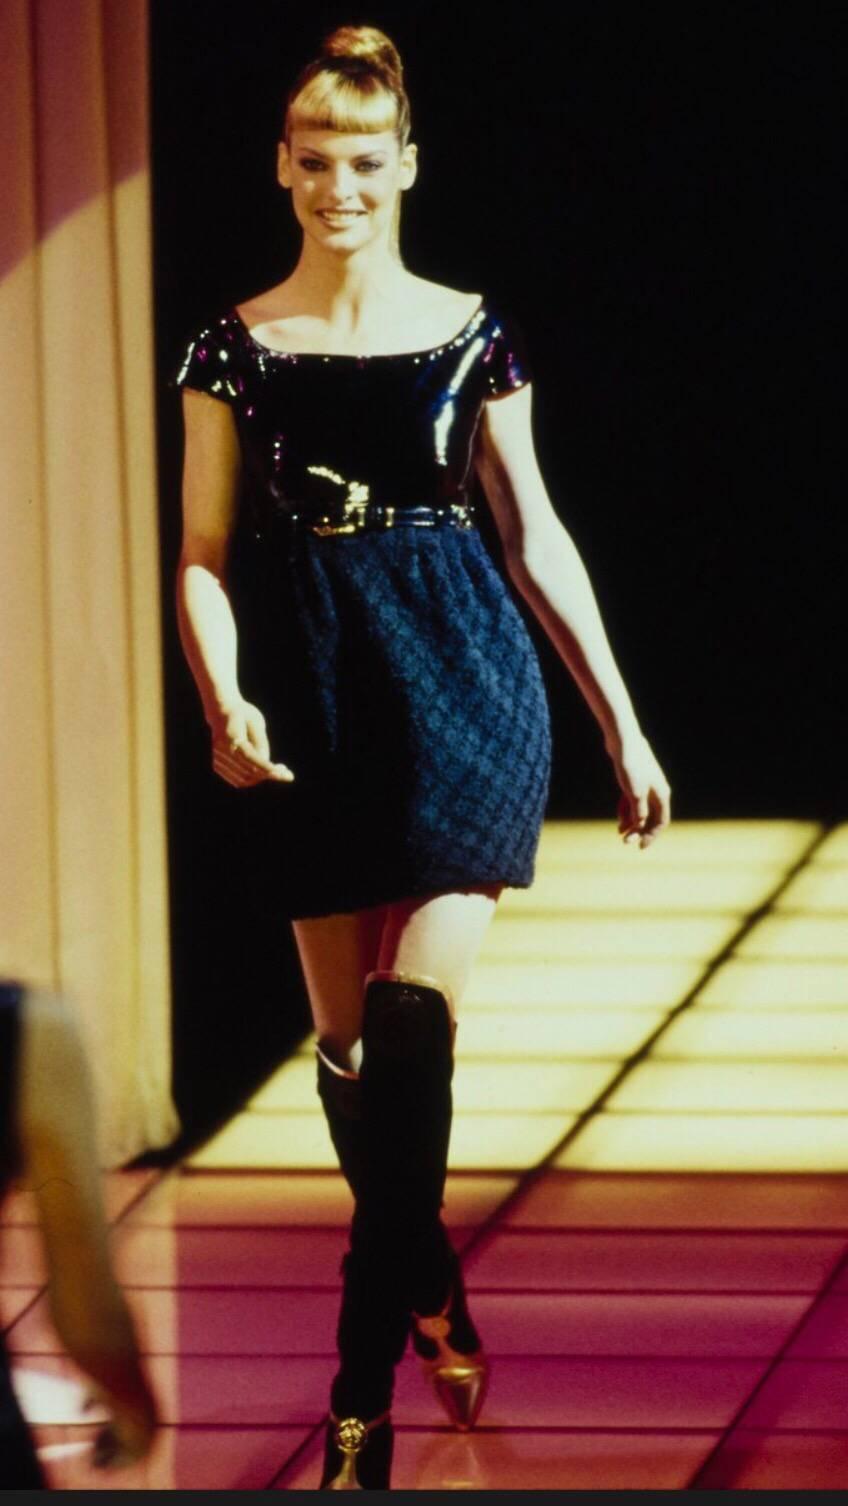 Documented rare GIANNI VERSACE COUTURE Fall/Winter 1994 runway dress! Linda Evangelista strutted down the runway in this beauty (see photo). Fitted PVC fitted bodice looks like patent leather, and has cap sleeves. Wool boucle skirt, and detachable